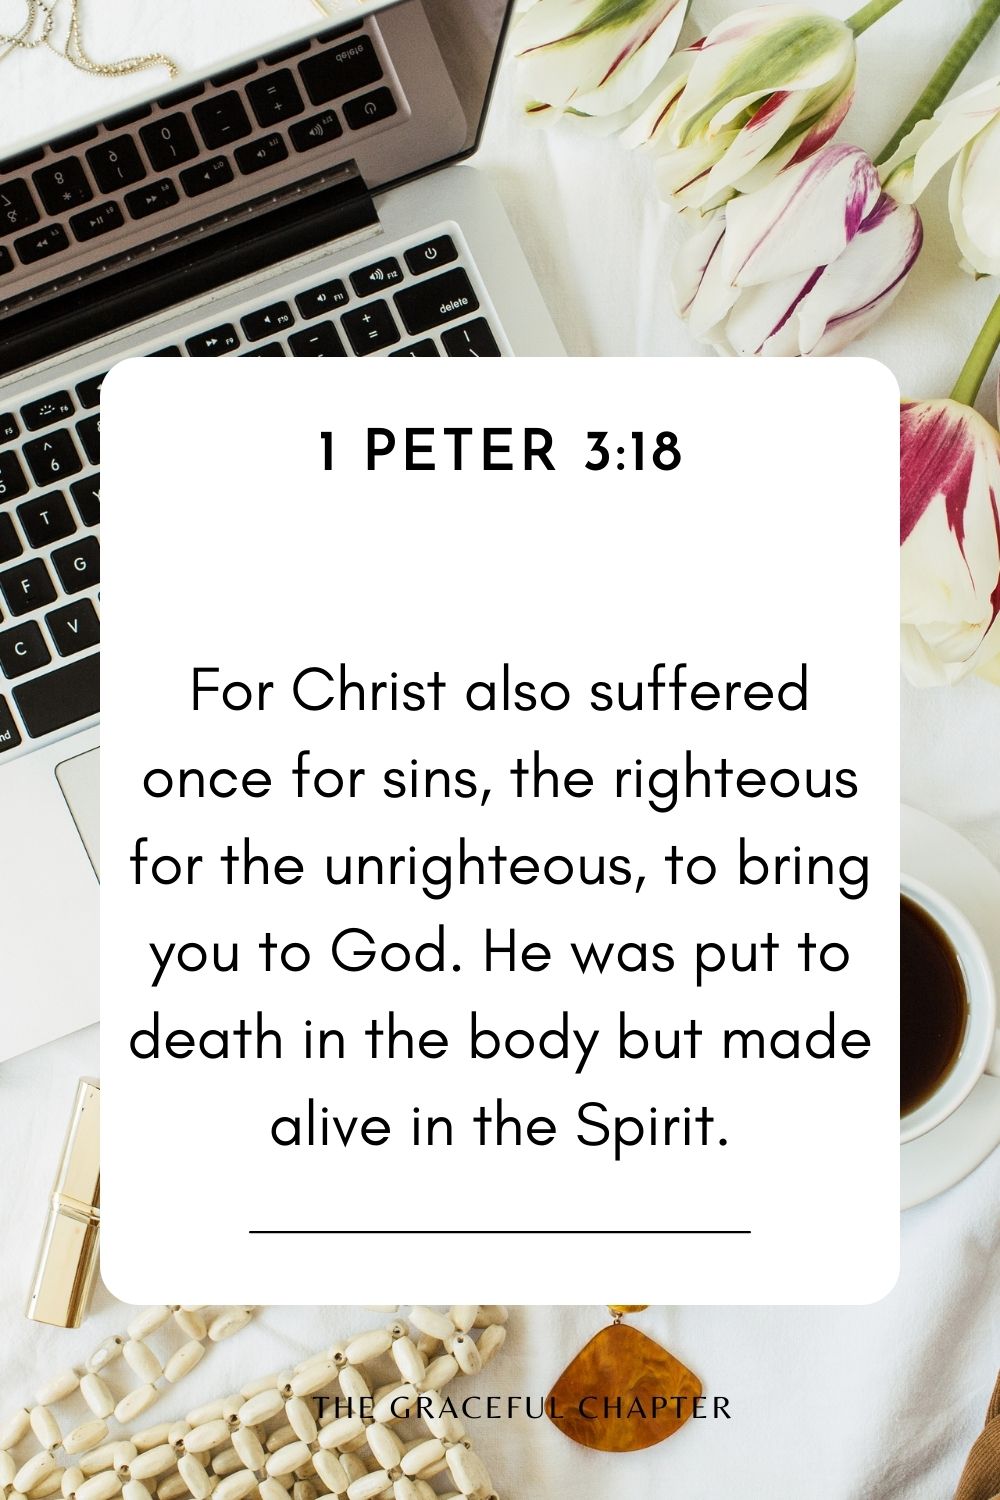 For Christ also suffered once for sins, the righteous for the unrighteous, to bring you to God. He was put to death in the body but made alive in the Spirit. 1 Peter 3:18